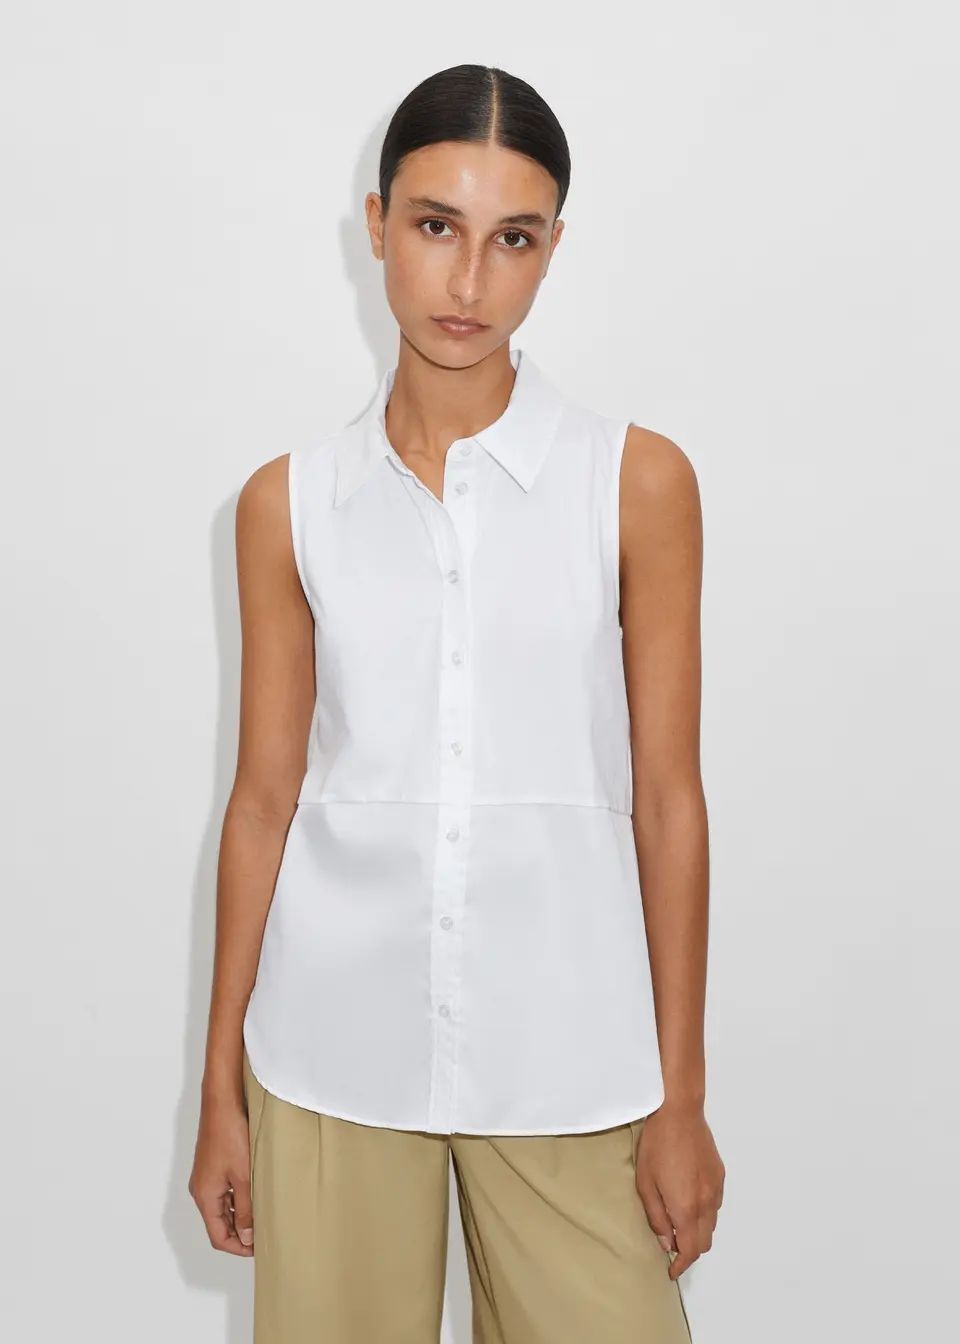 Cotton Sleeveless Mixed-Media Layering Top | ME+EM Global (Excluding US)